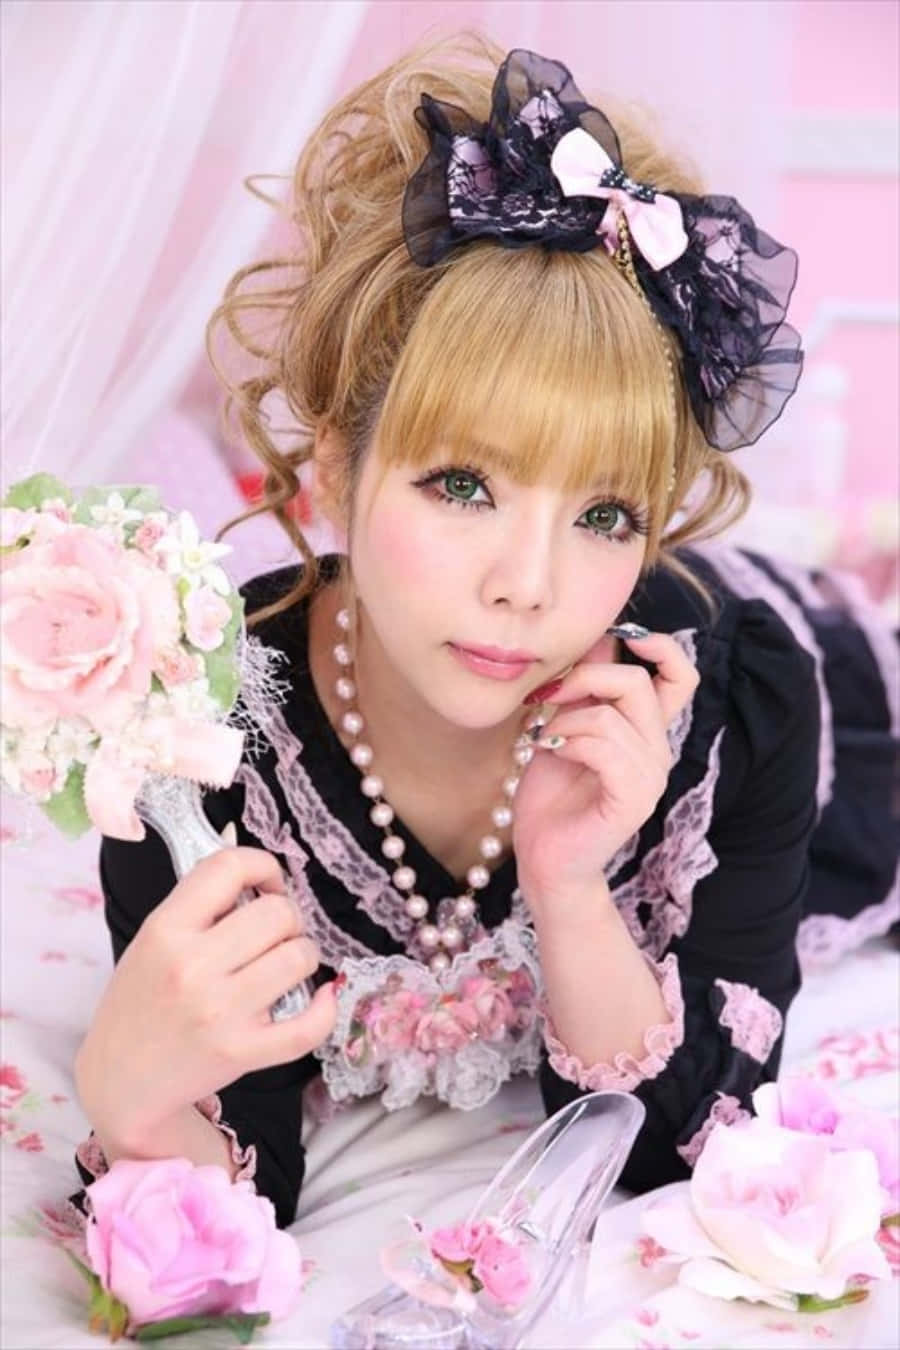 Stylish Gyaru Girl Posing for the Camera in Trendy Outfit Wallpaper